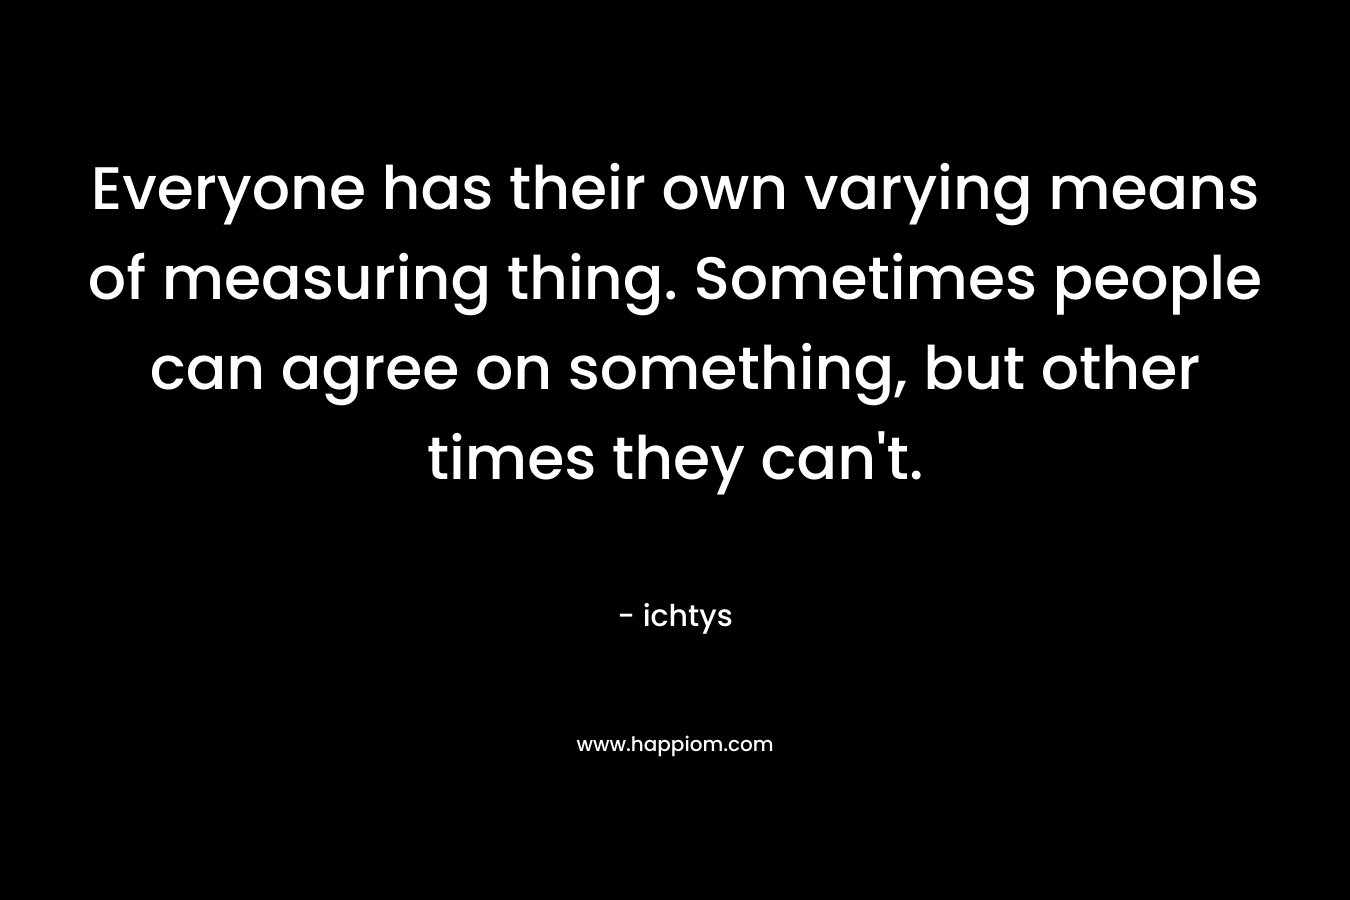 Everyone has their own varying means of measuring thing. Sometimes people can agree on something, but other times they can't.